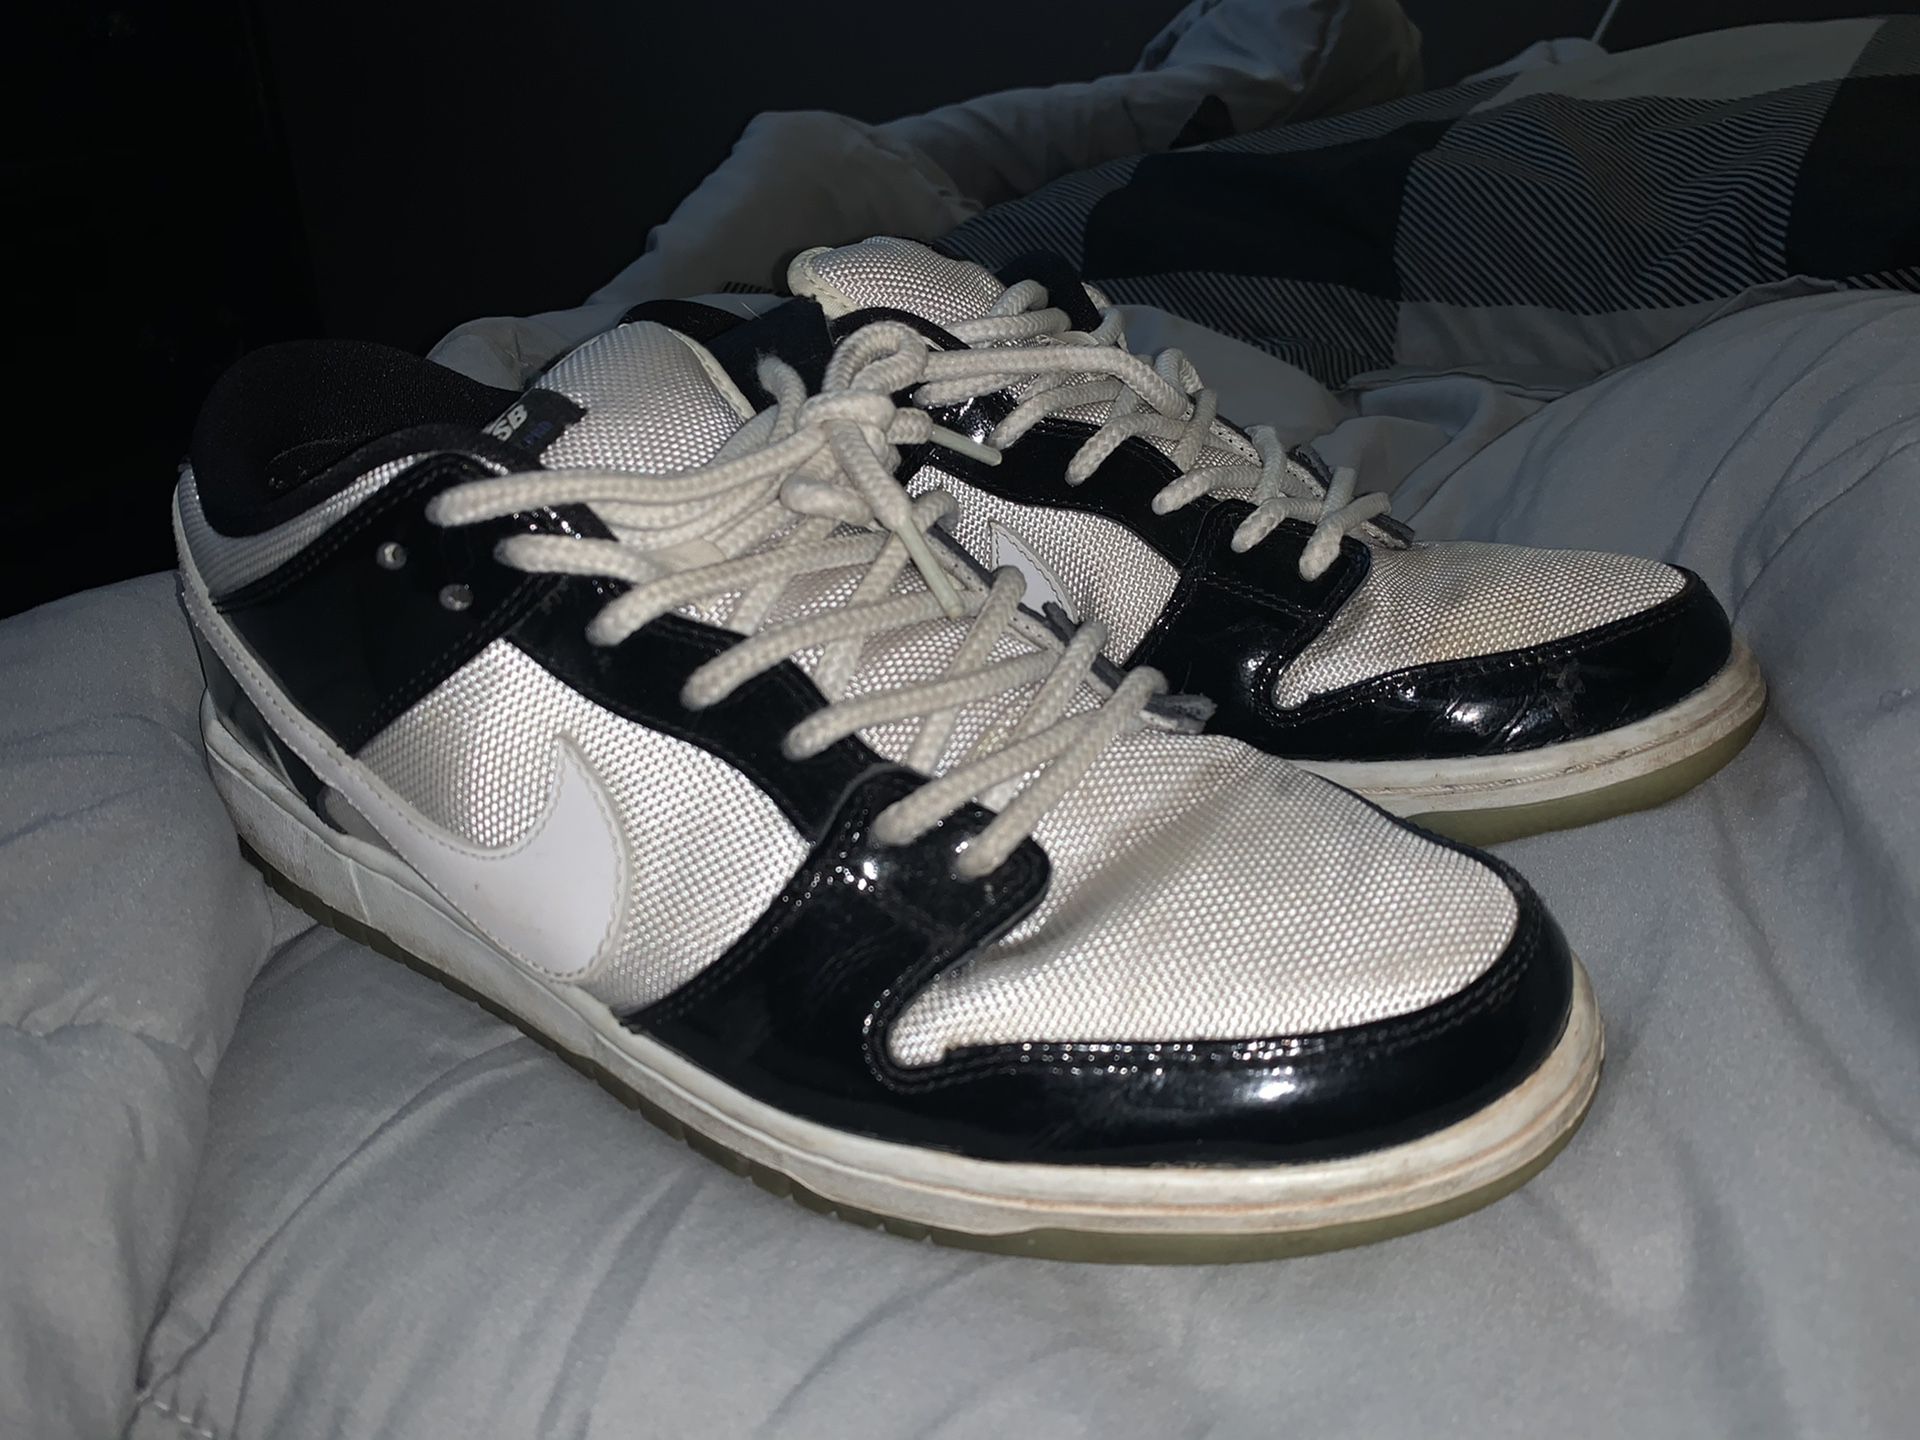 NIKE SB CONCORD LOW AND NIKE SB BROWN PAPER BAG HIGH FOR SALE!